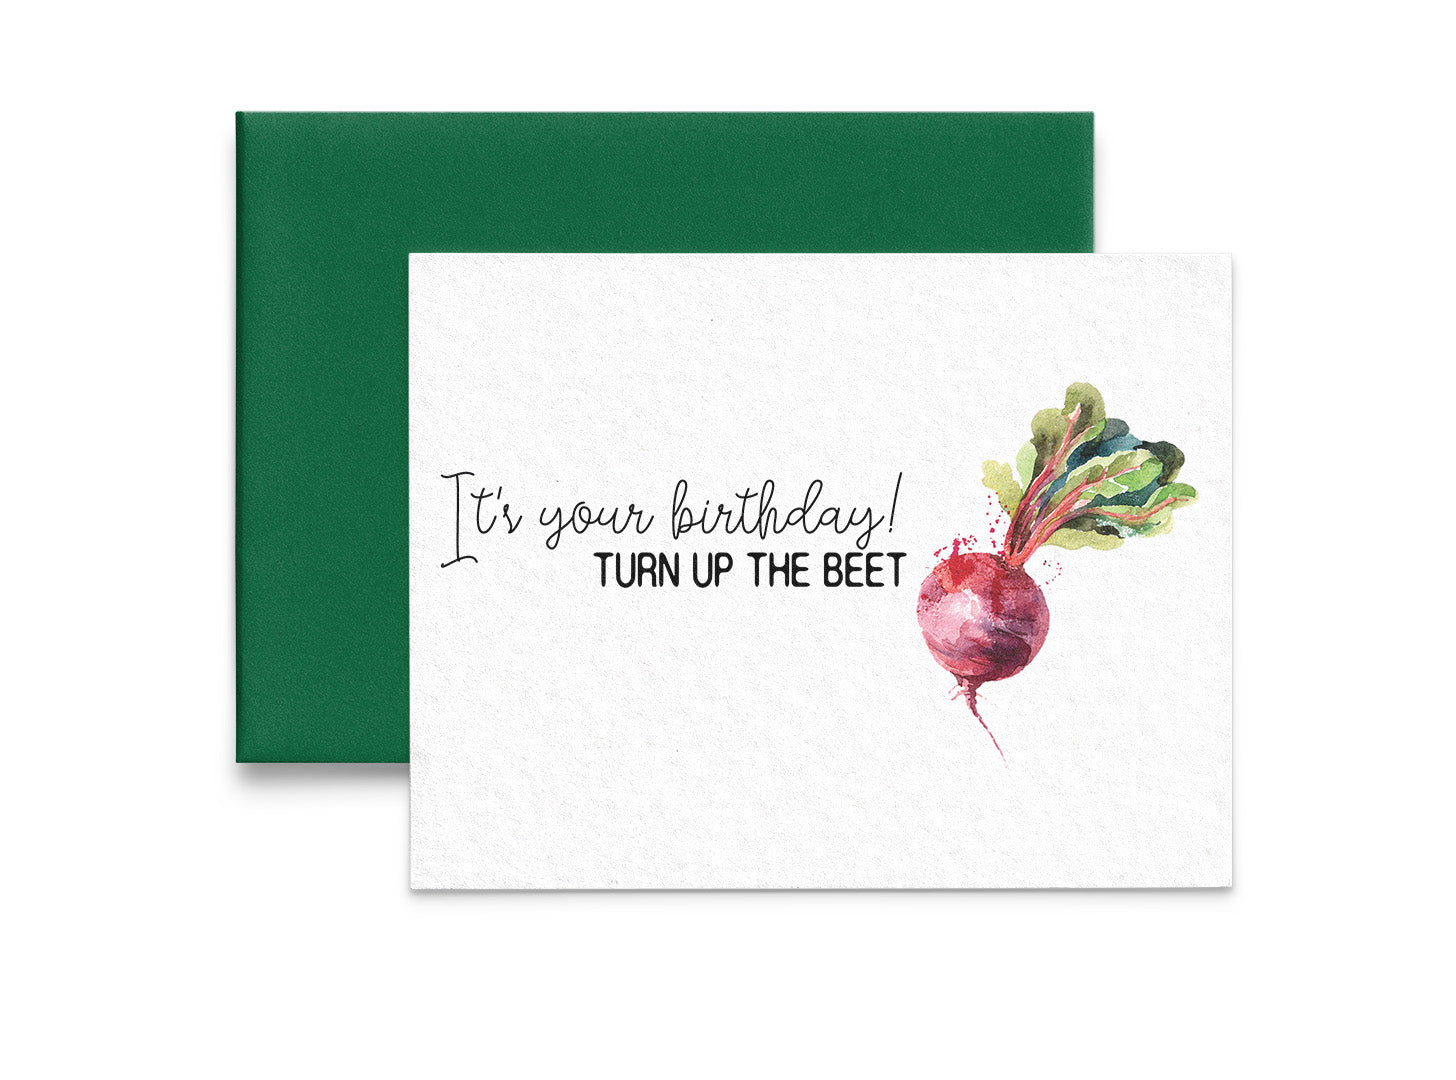 It's Your Birthday! Turn Up the Beet Card